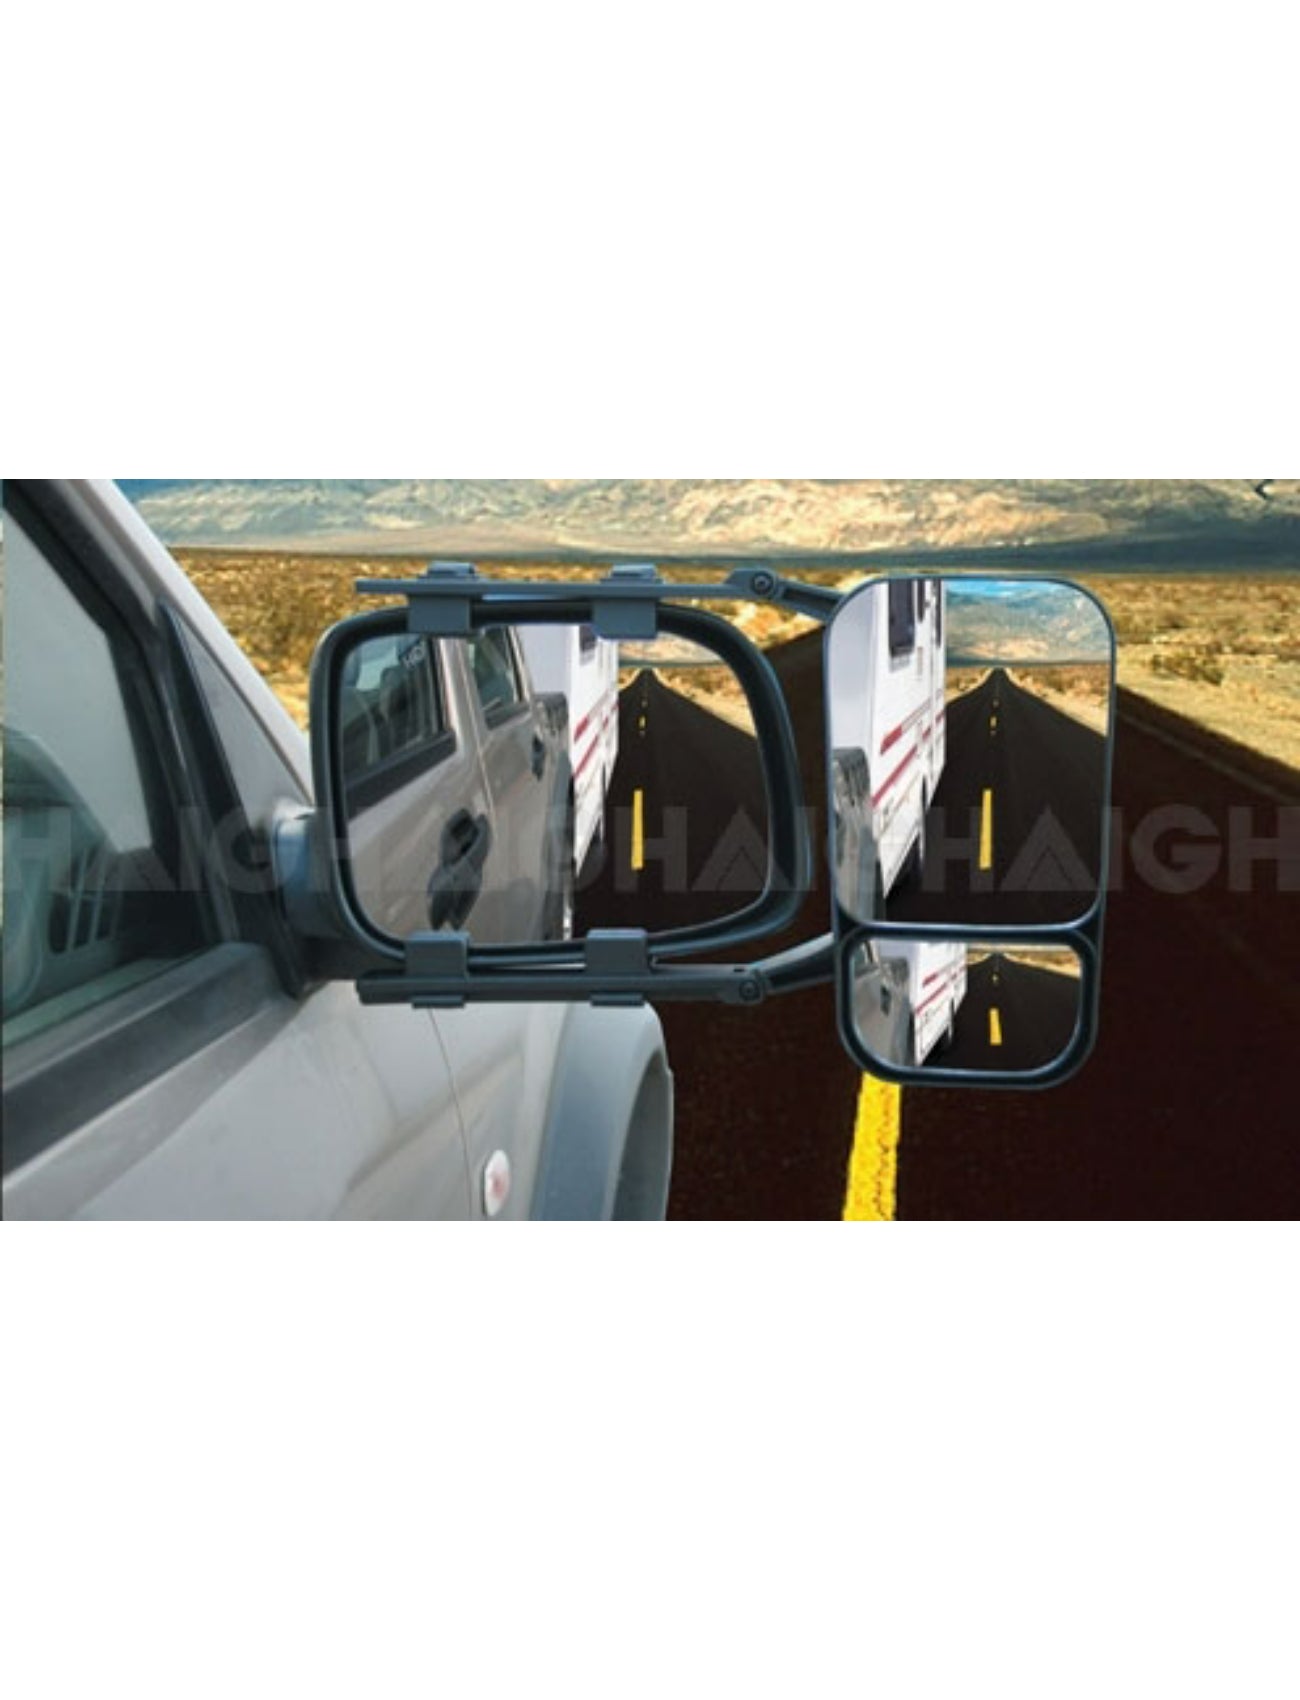 MIRROR TOWING ADJUSTABLE STRAP ON